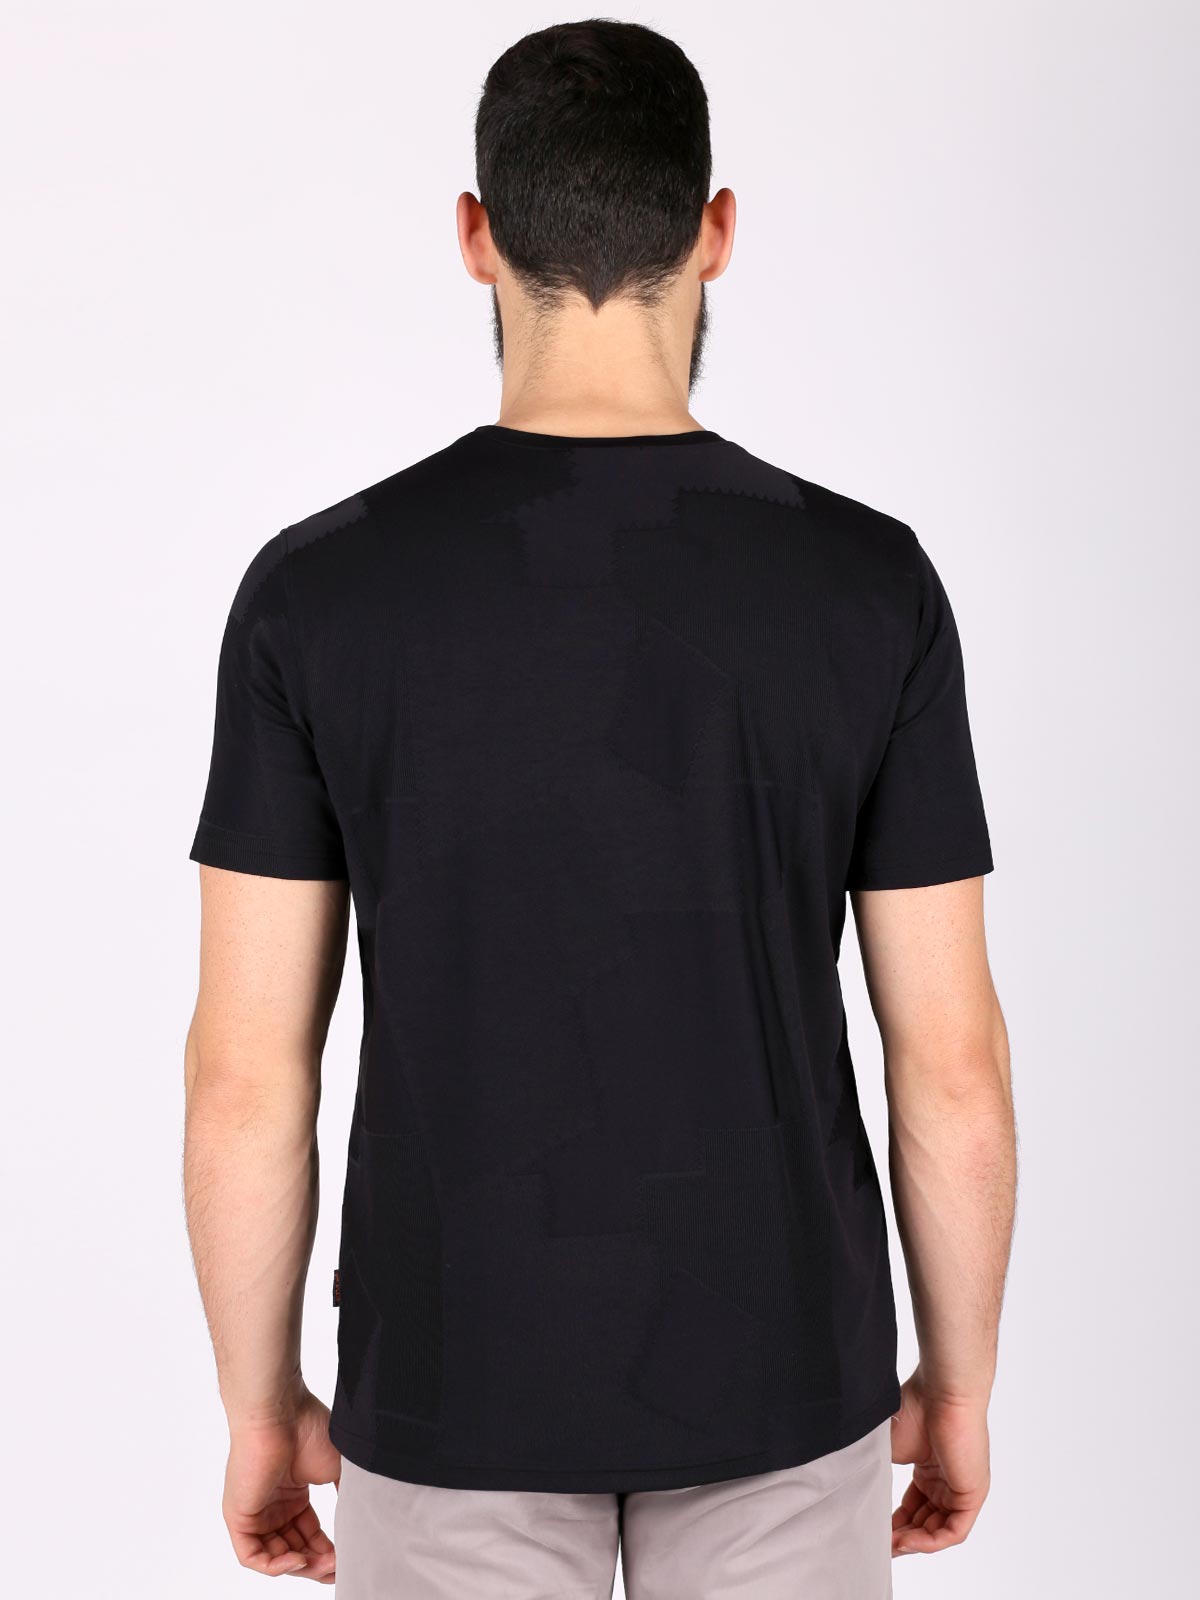  black tshirt with abstract relief  - 88006 € 6.75 img2